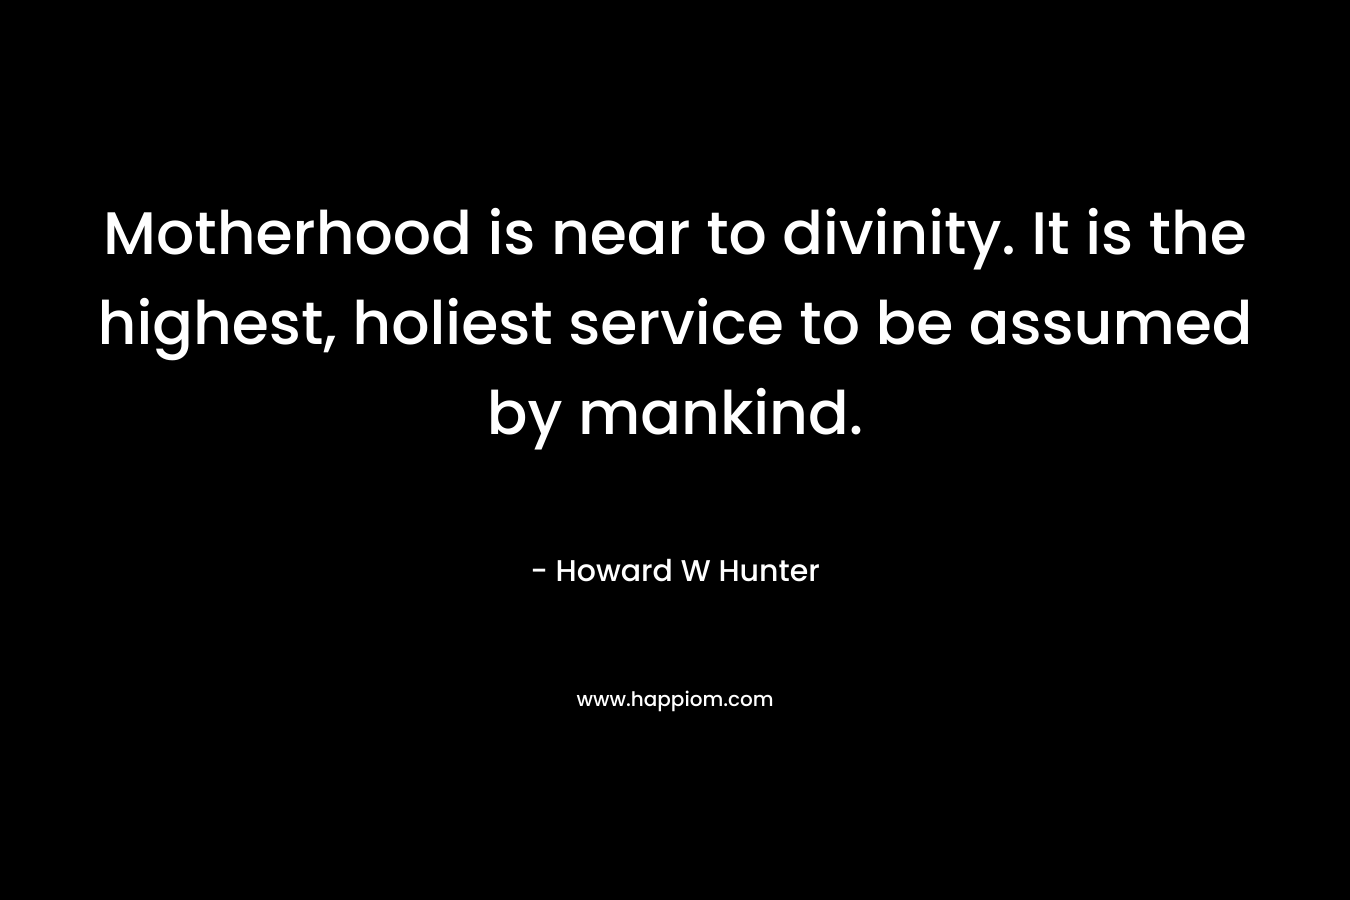 Motherhood is near to divinity. It is the highest, holiest service to be assumed by mankind. – Howard W Hunter